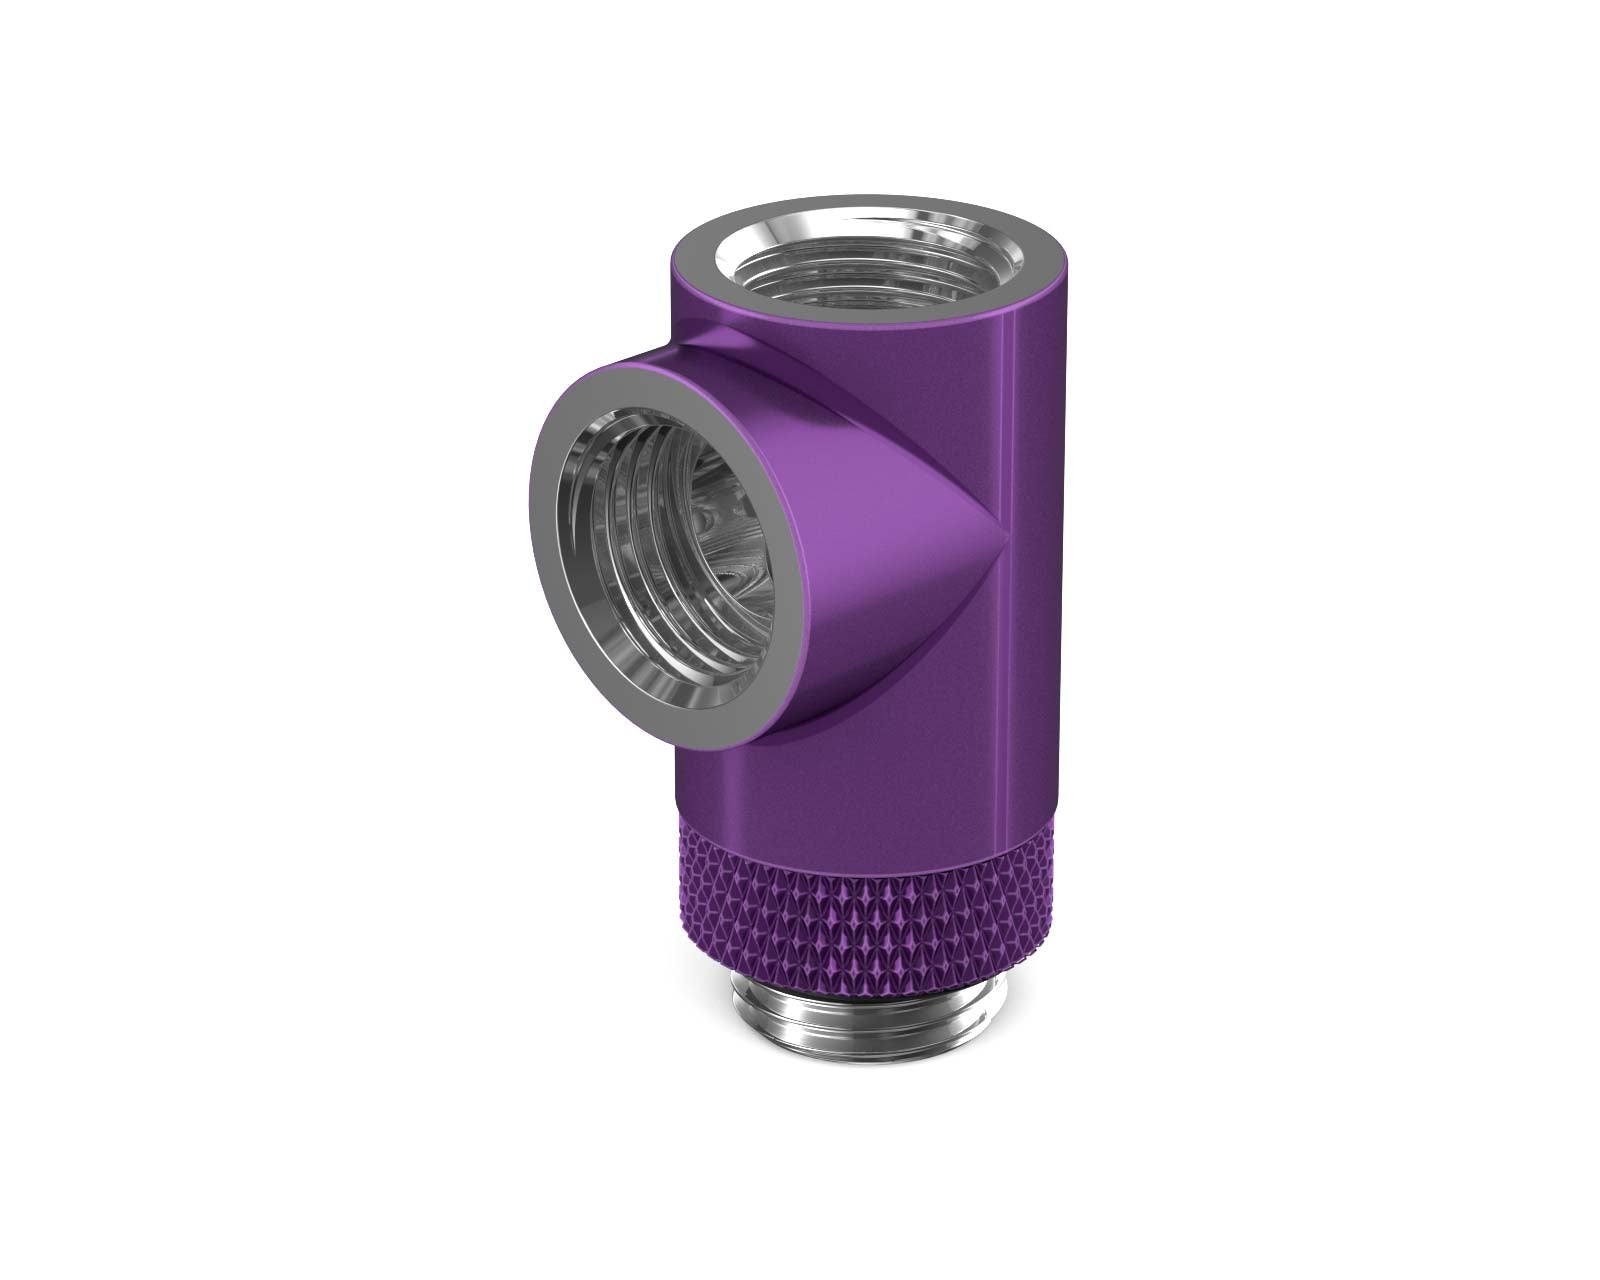 PrimoChill G 1/4in. Inline Rotary 3-Way SX Female T Adapter - PrimoChill - KEEPING IT COOL Candy Purple